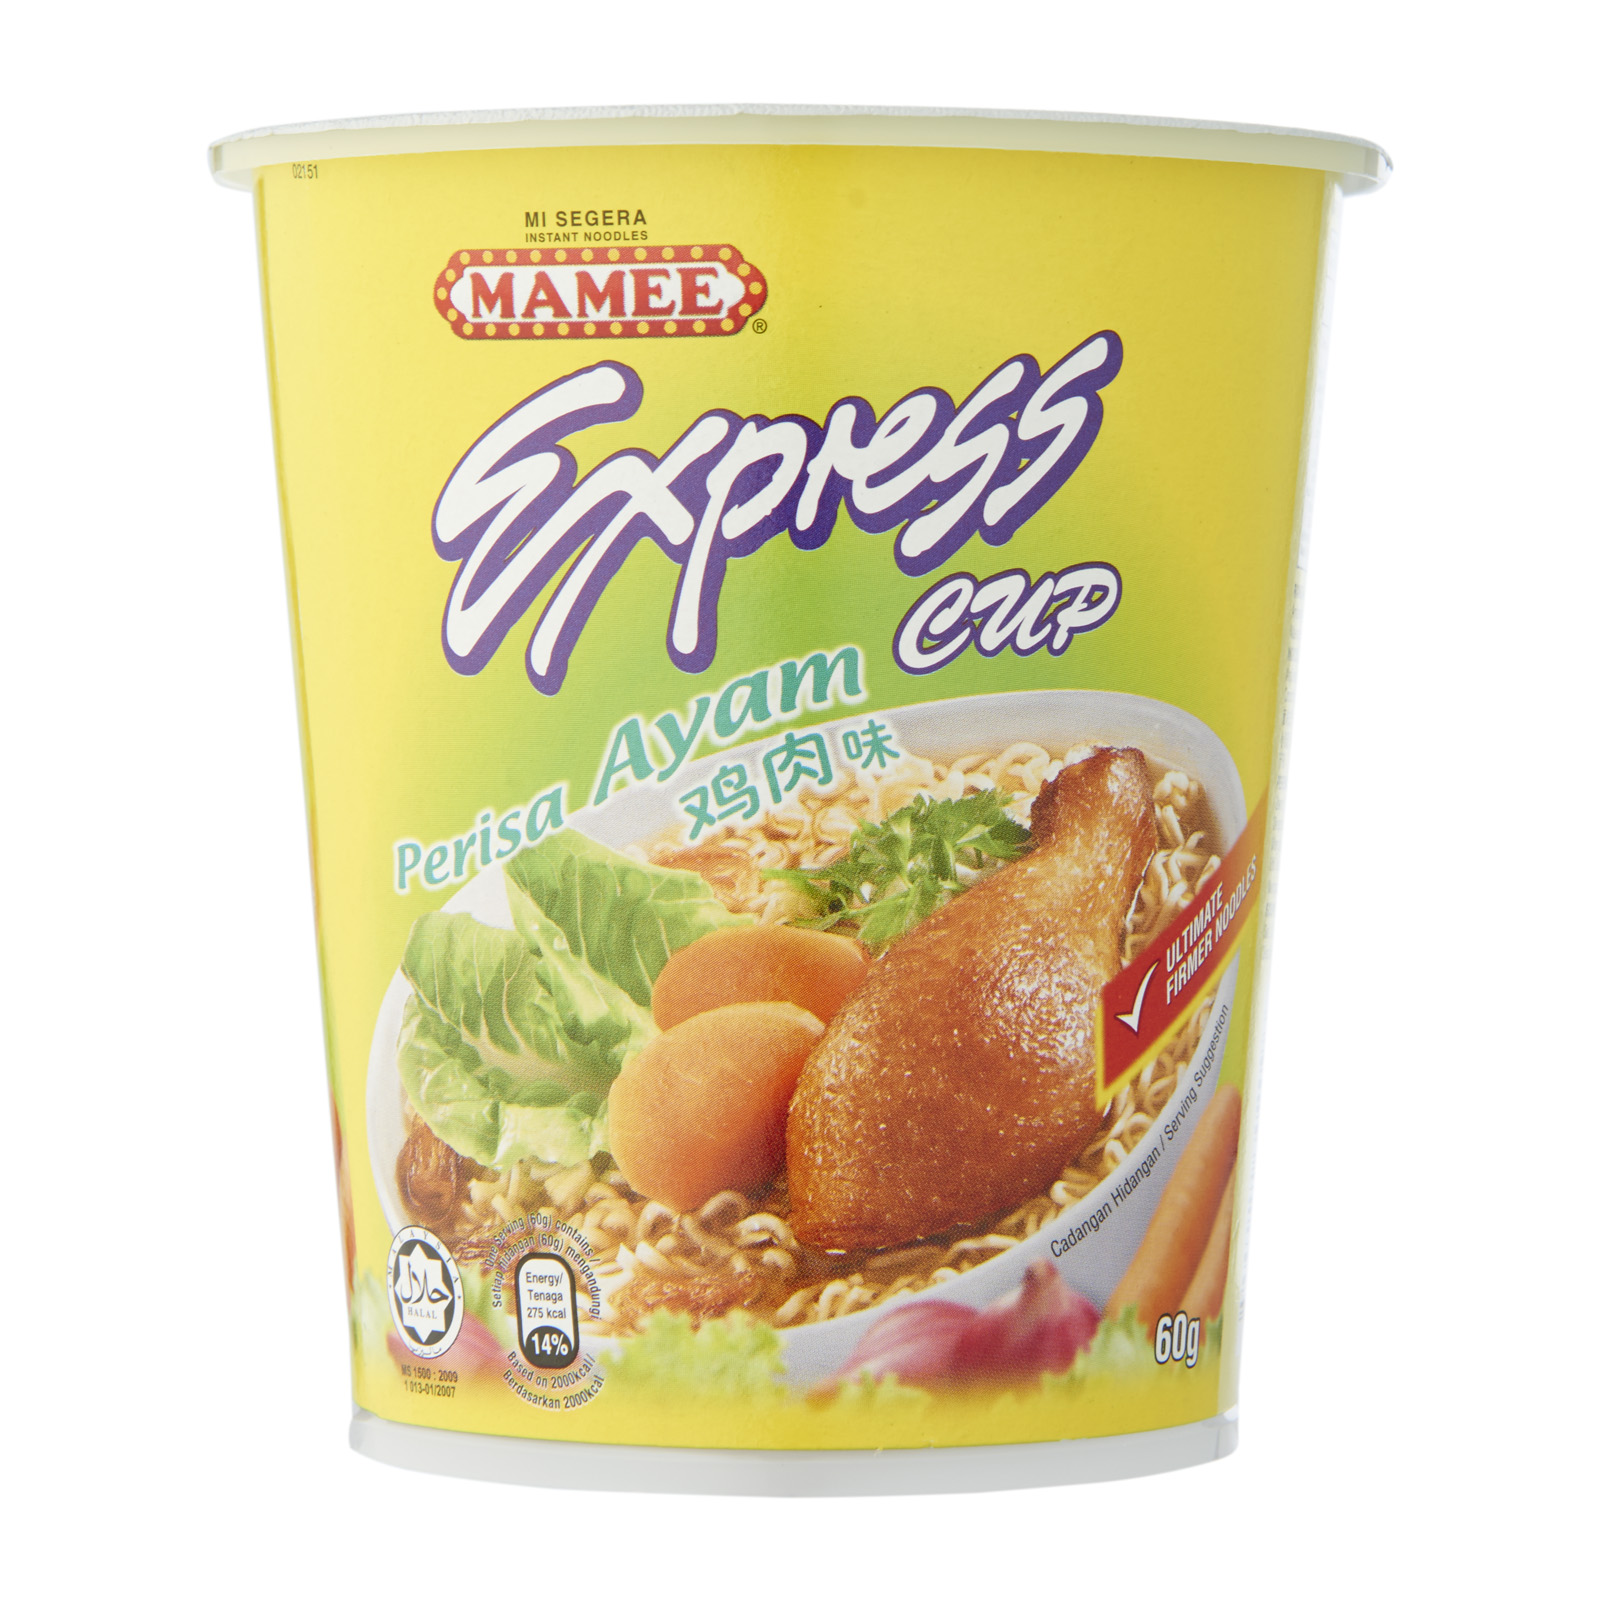 Mamee Chicken Express Cup Instant Noodles reviews